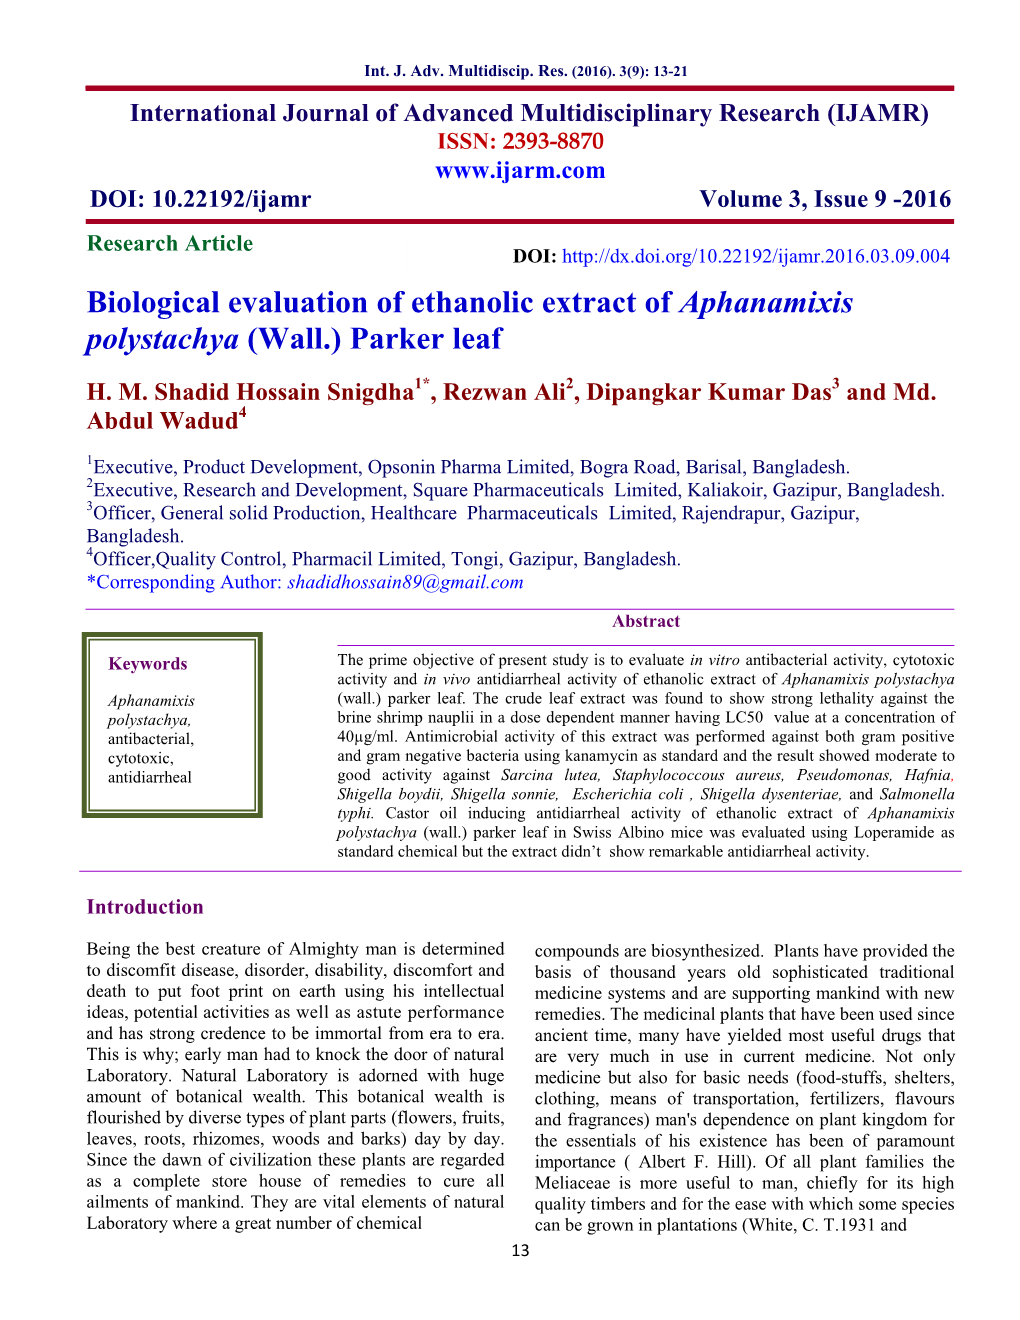 Biological Evaluation of Ethanolic Extract of Aphanamixis Polystachya (Wall.) Parker Leaf H